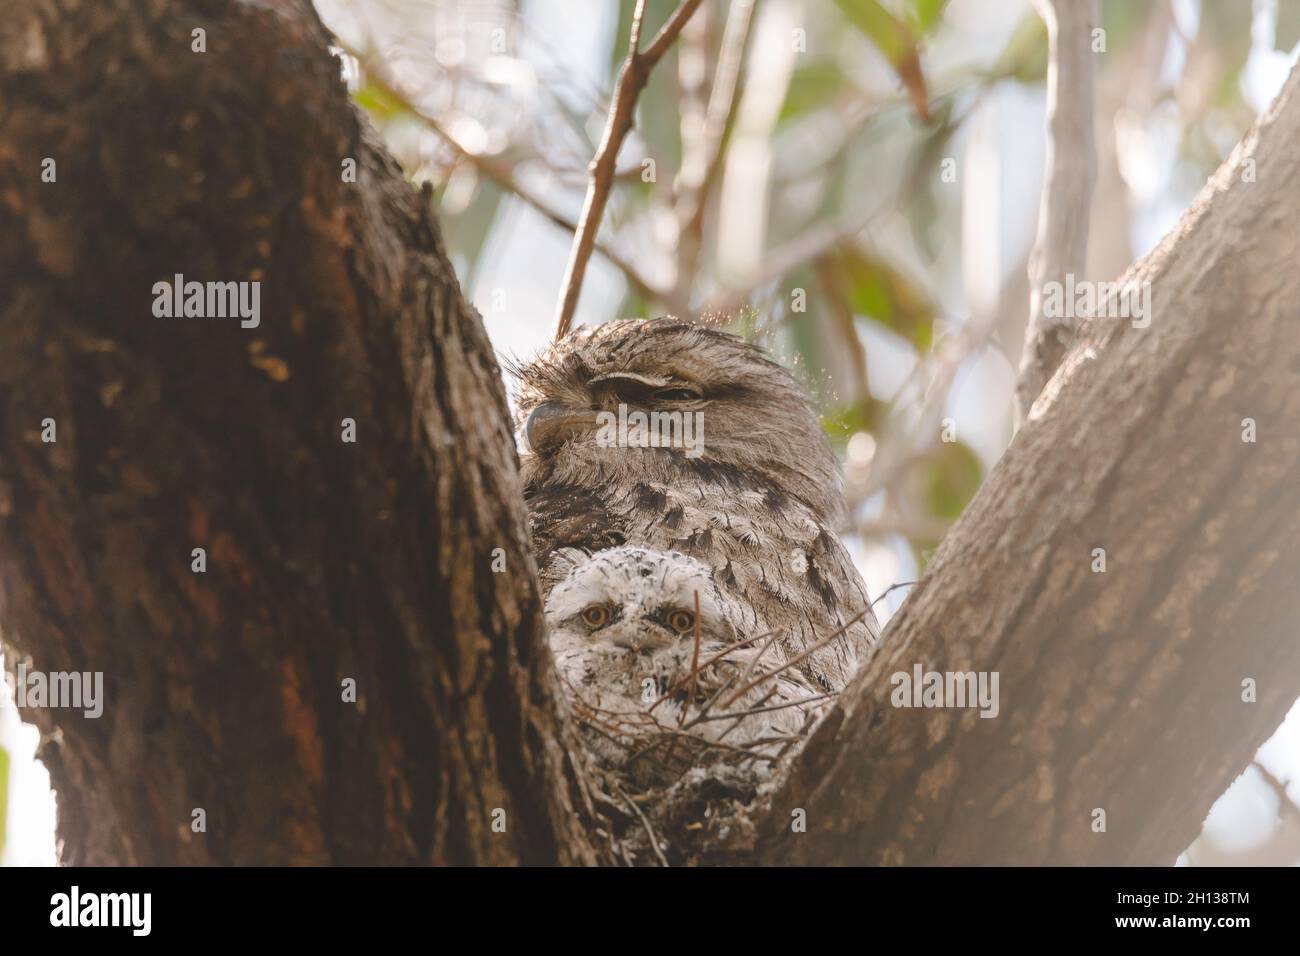 A baby Tawny Frogmouth chick nestled beside its parent in a tree fork nest. Stock Photo